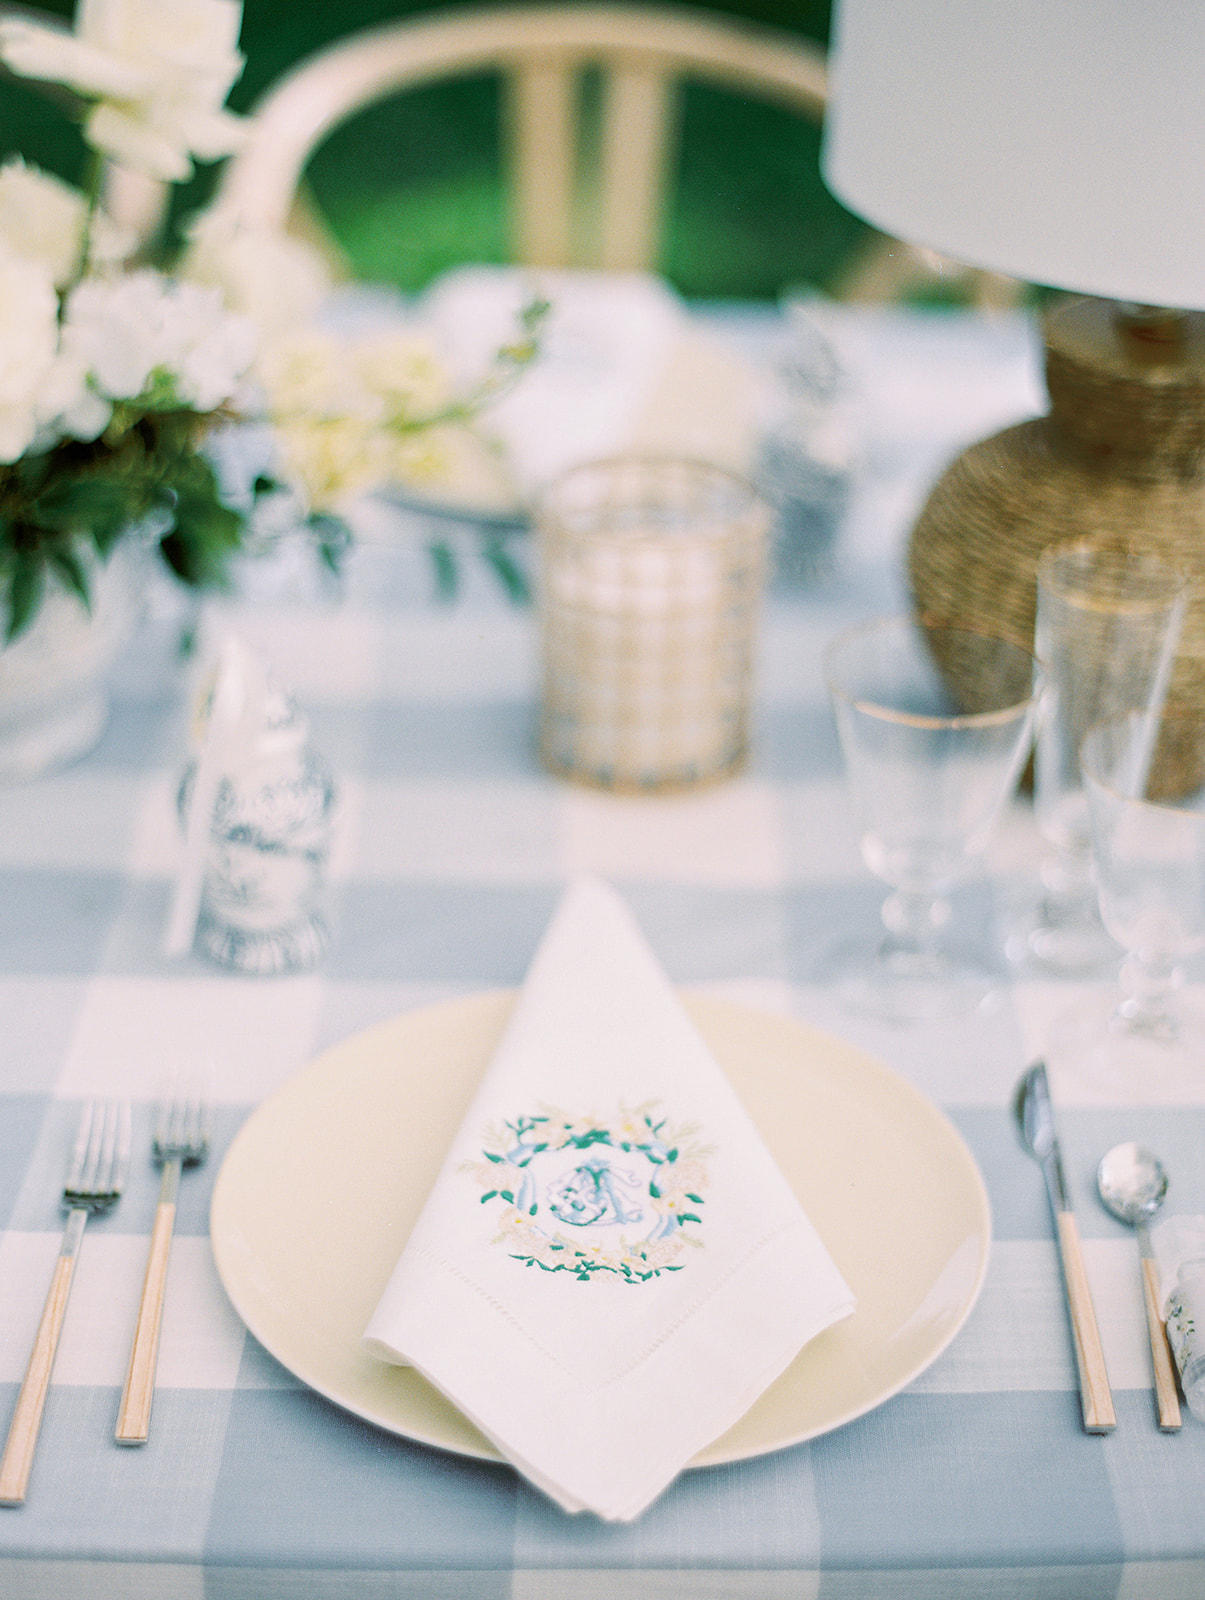 picnic inspired place setting for preppy Grandmillennial Intimate Backyard Spring Afternoon Wedding in Philadelphia